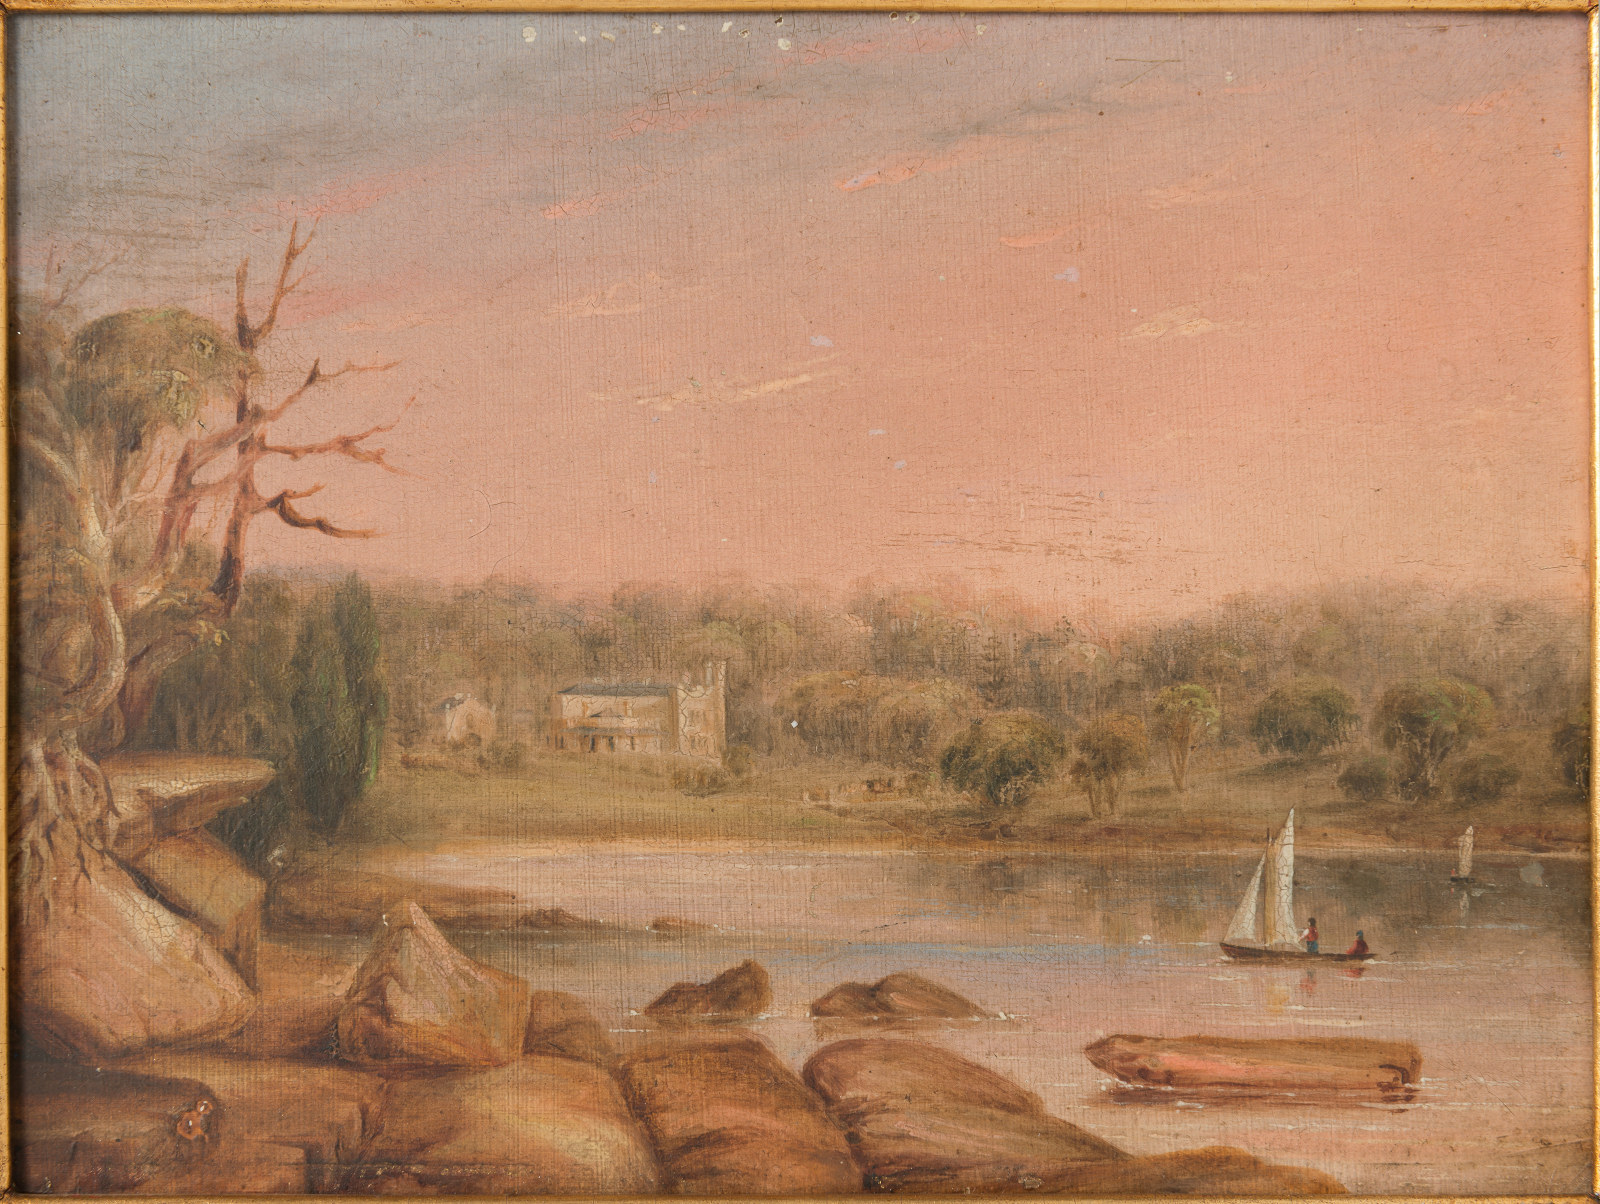 Vaucluse House, painted by George Peacock, c.1846-1850